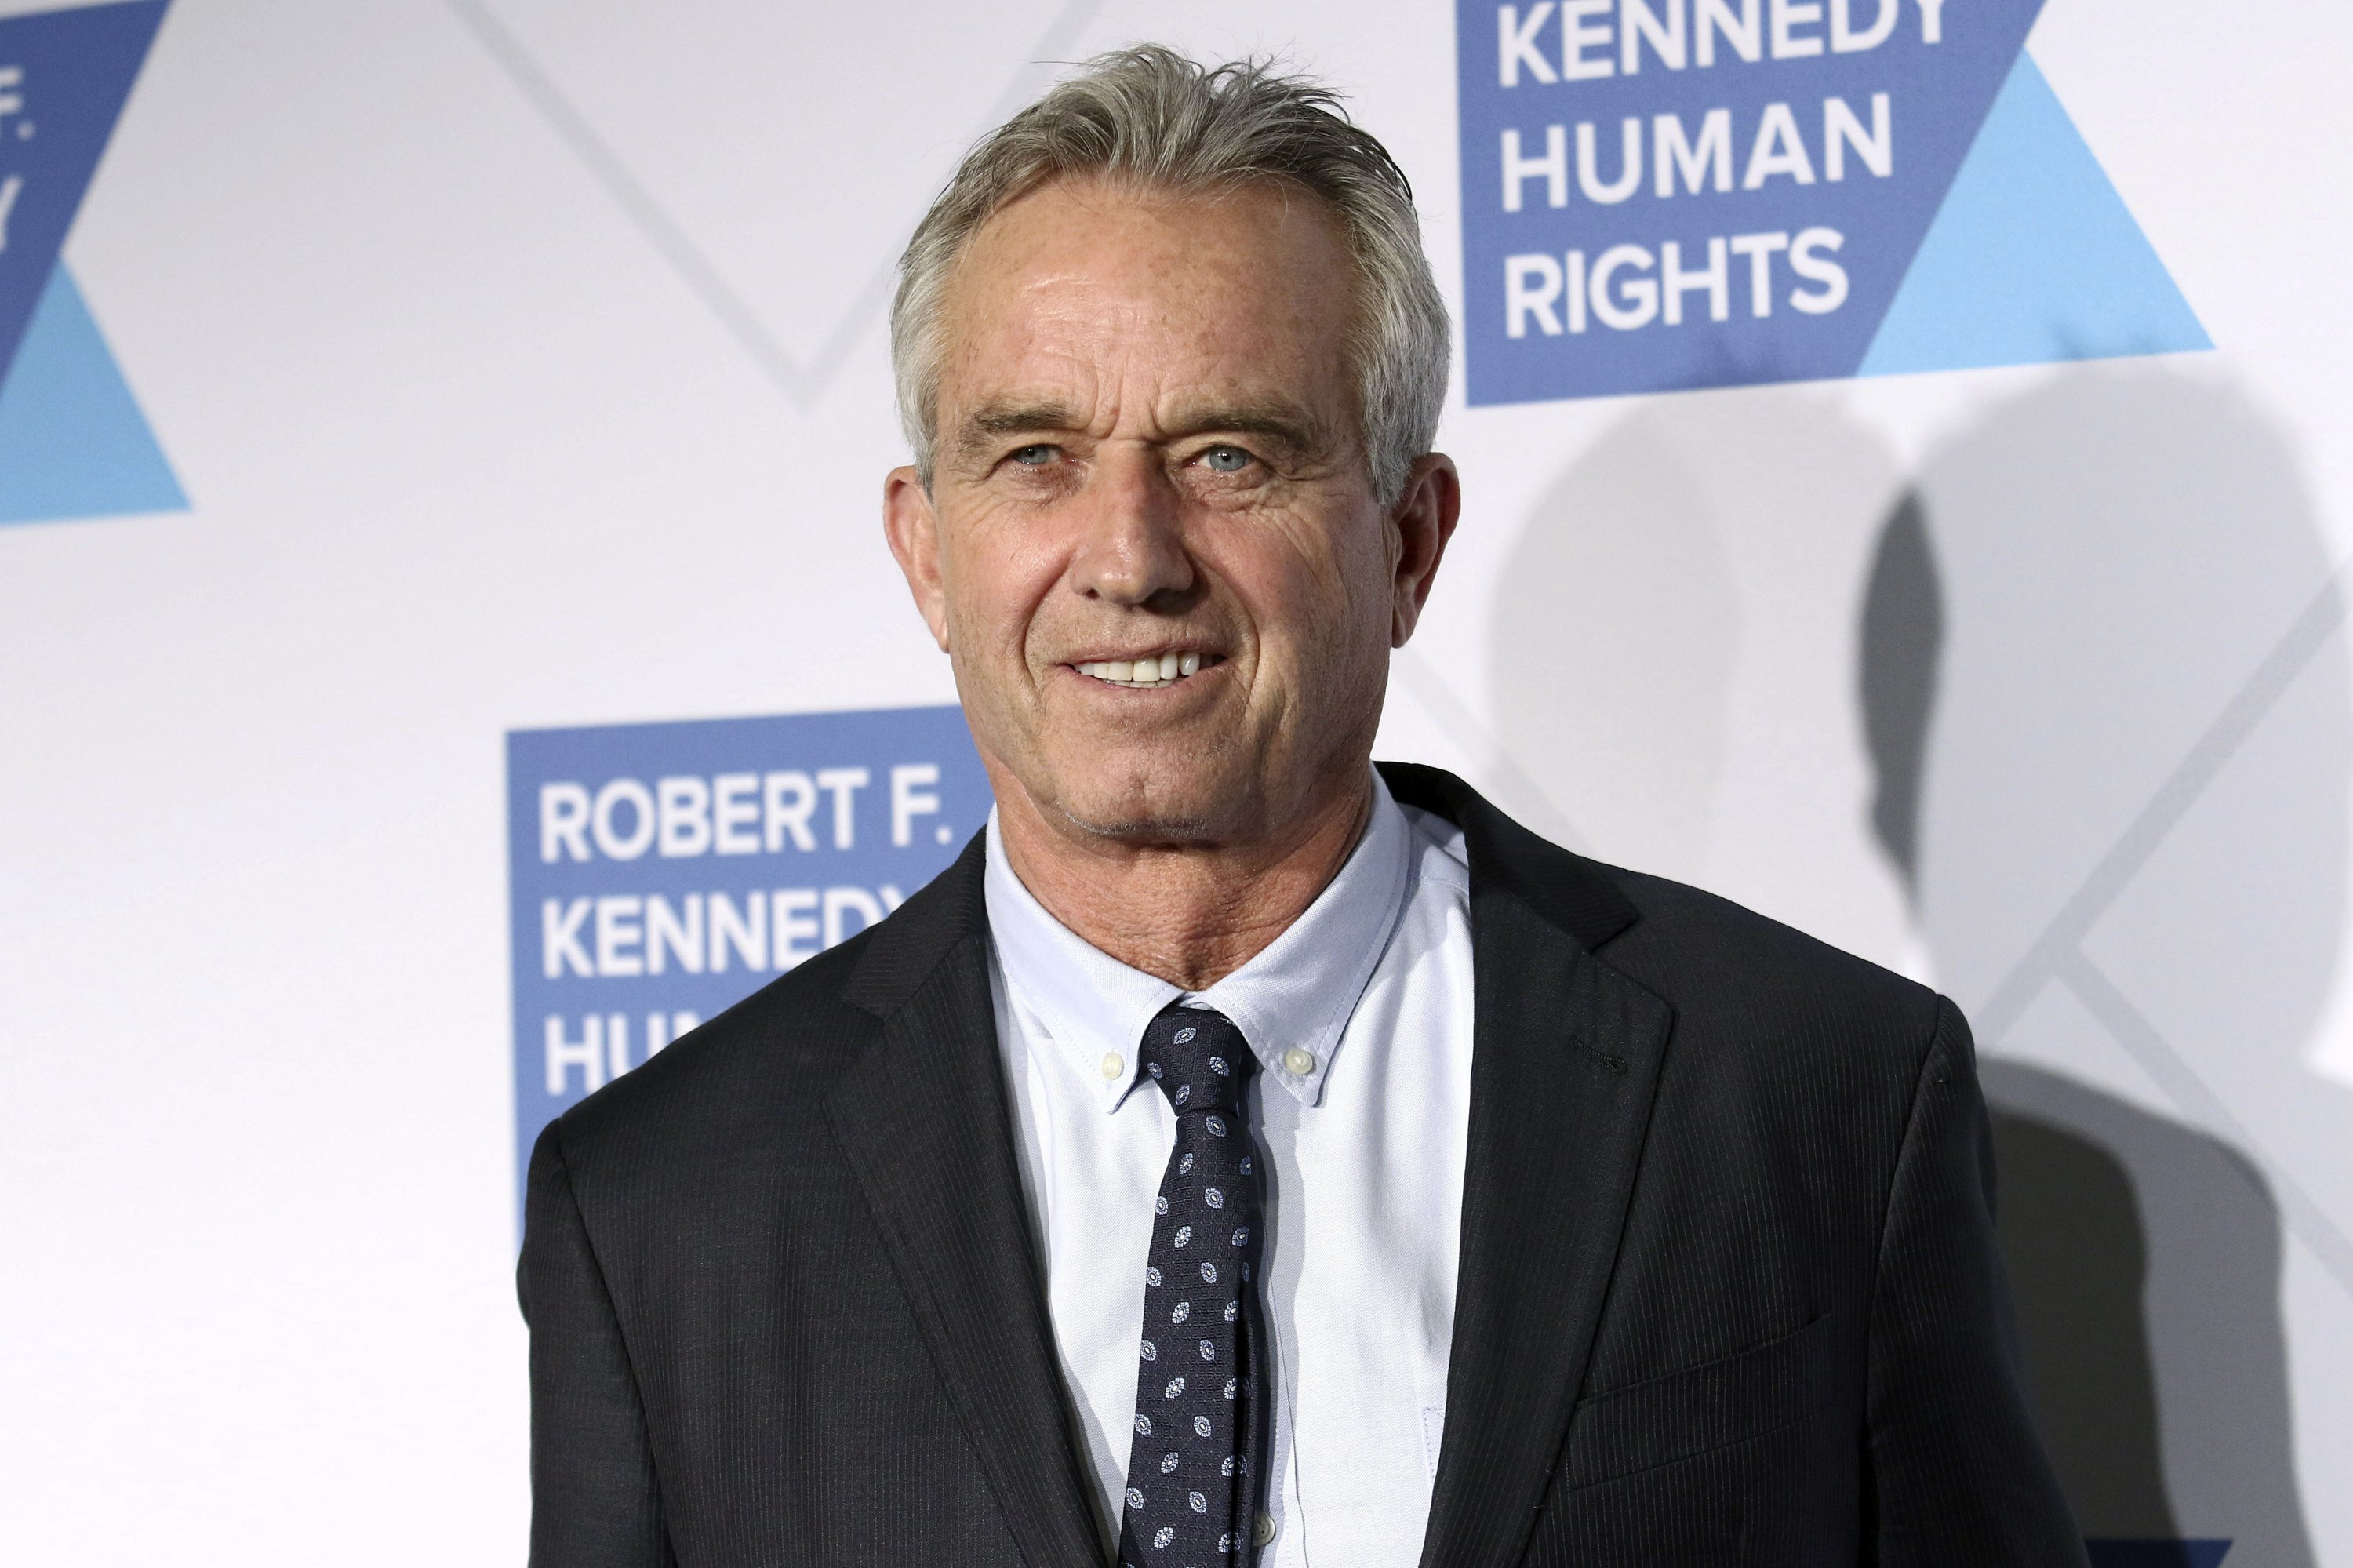 RFK Jr. launched Instagram for misinformation about vaccines